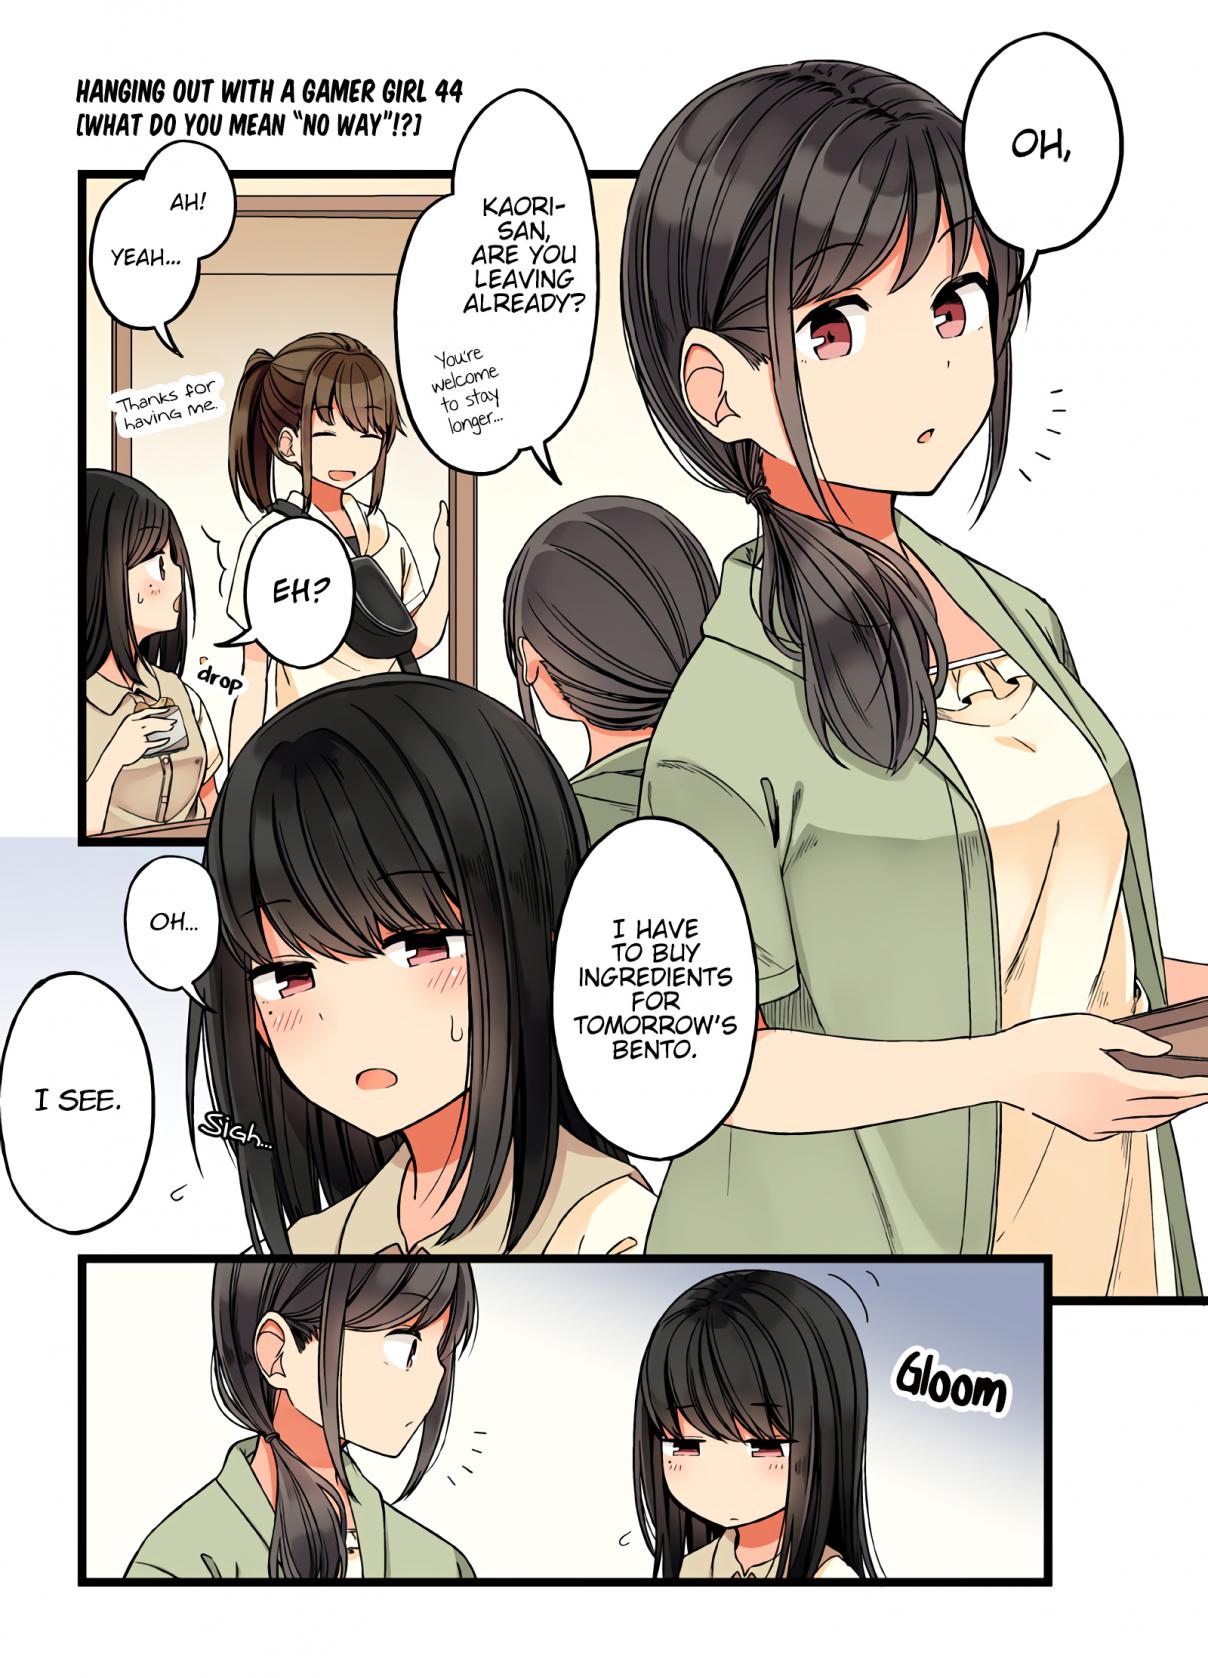 Hanging Out with a Gamer Girl Ch. 44 What Do You Mean "No Way"!?